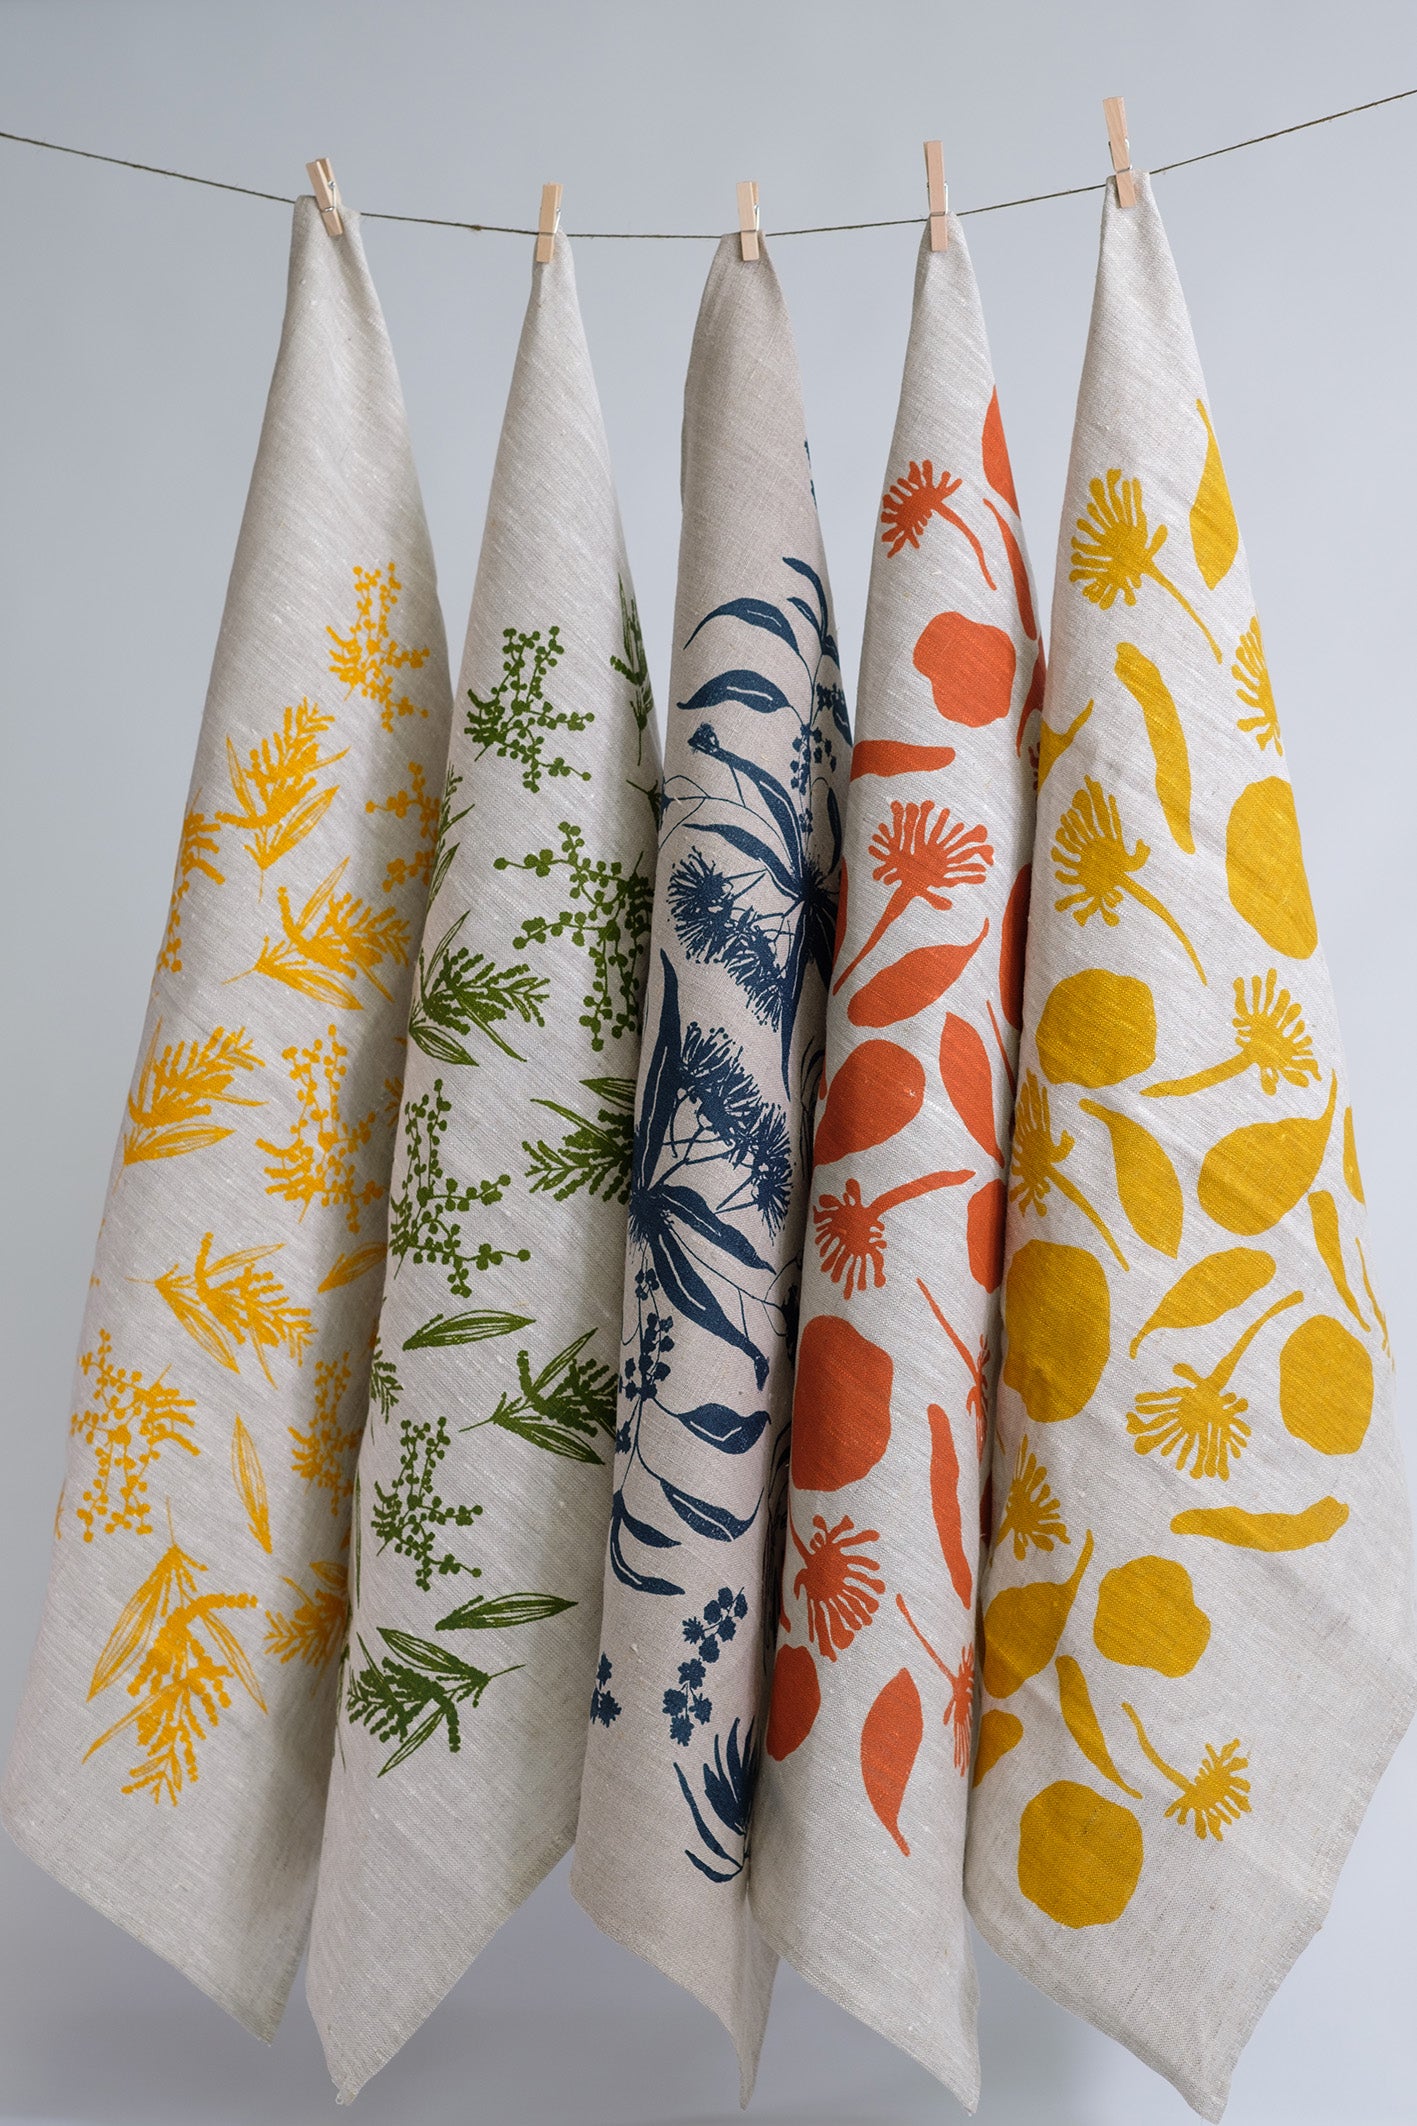 Linen tea towels screen printed with wattle design, mixed australian flora design and seed pods design. Screenprinted and designed by Femke Textiles